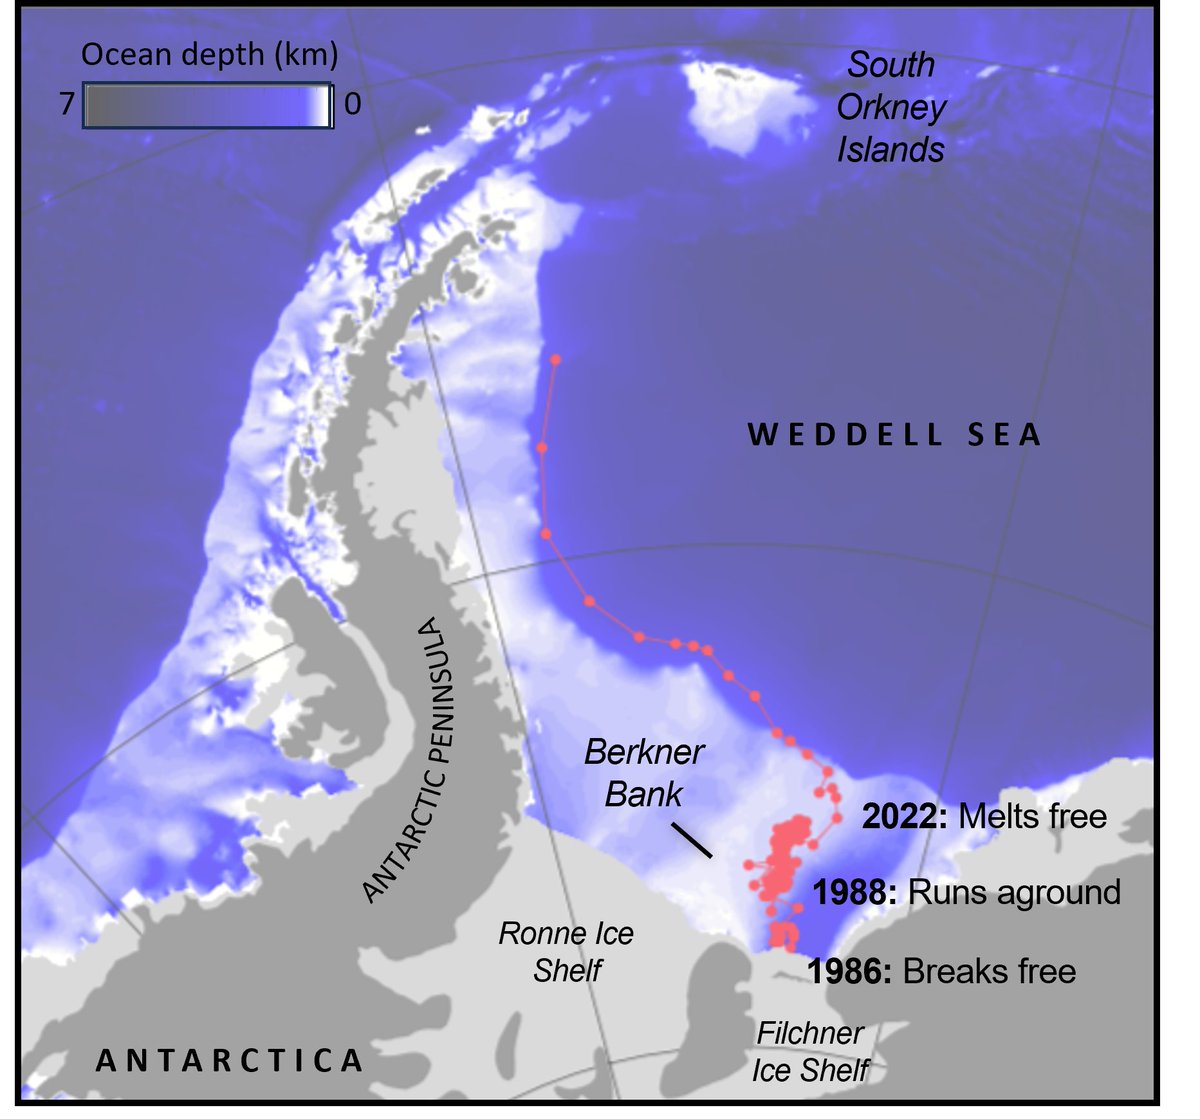 So it turns out that the A23a mega iceberg has been slowly melting all along, and that's why it was set free from its temporary home on Berkner Bank Seems the ocean is about 0.25°C above freezing Even the coldest parts of out planet are warming bbc.co.uk/news/science-e…